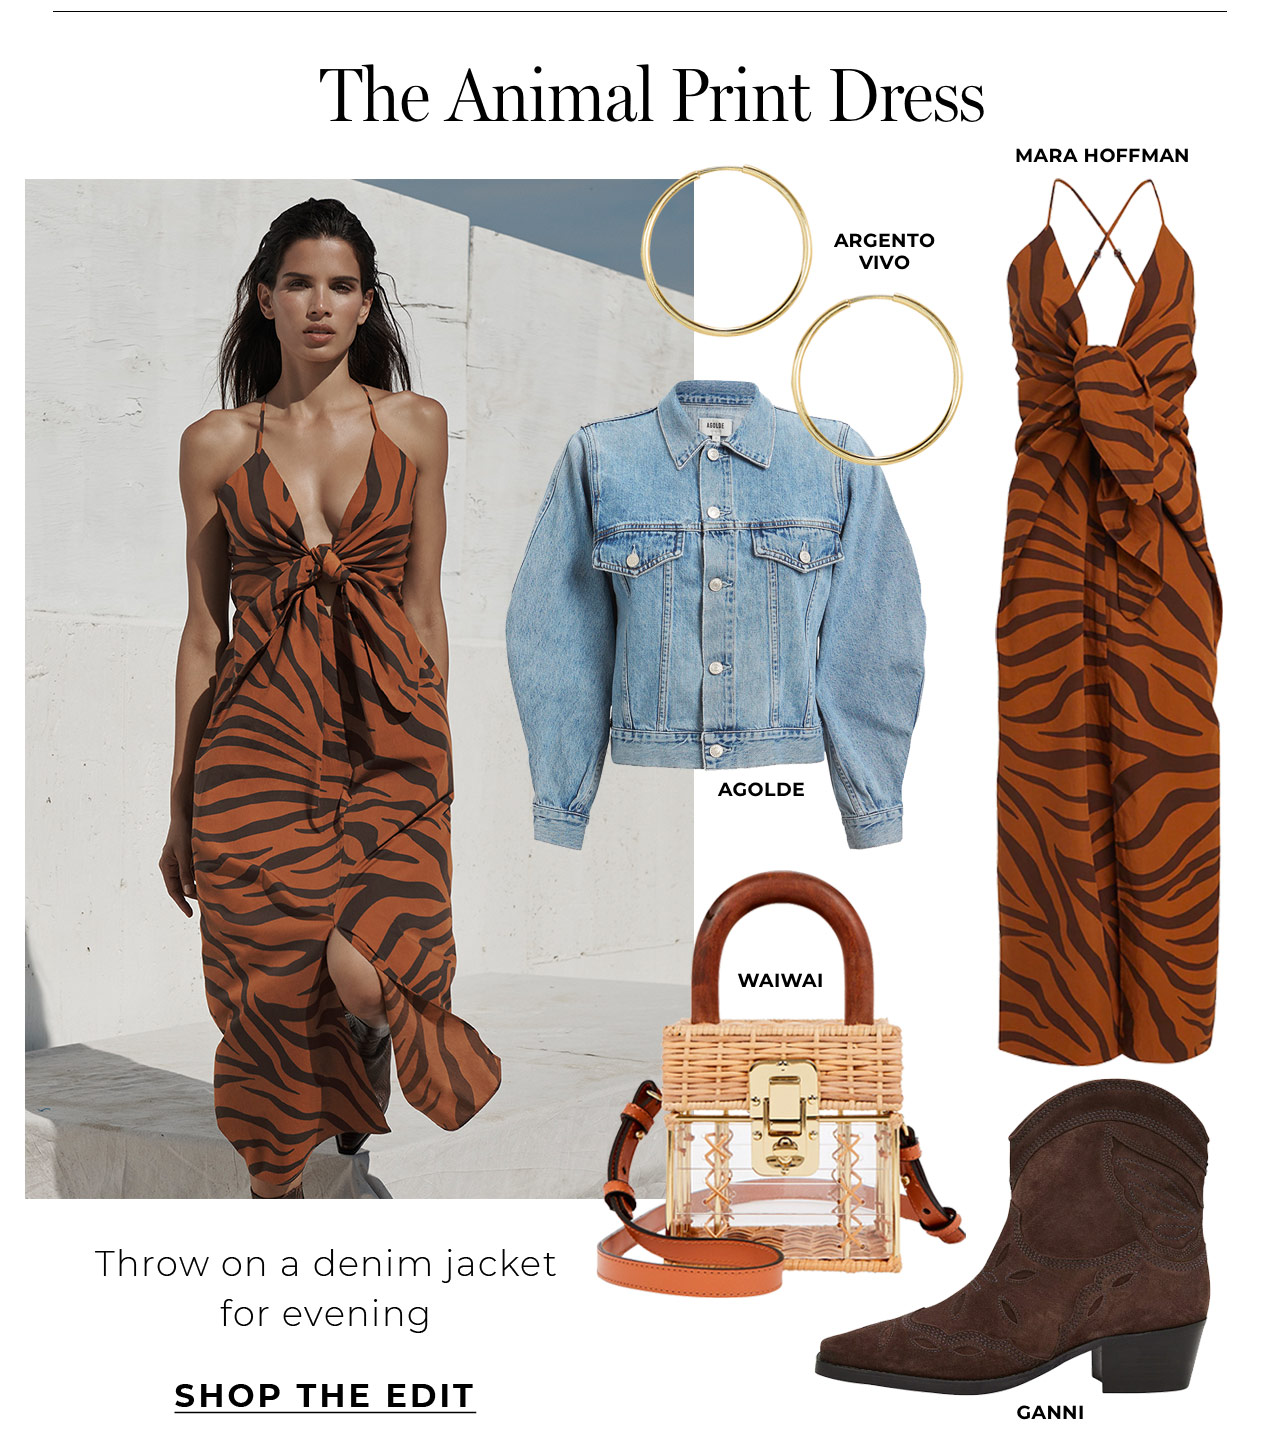 Try an animal print dress for day and throw on a denim jacket for evening